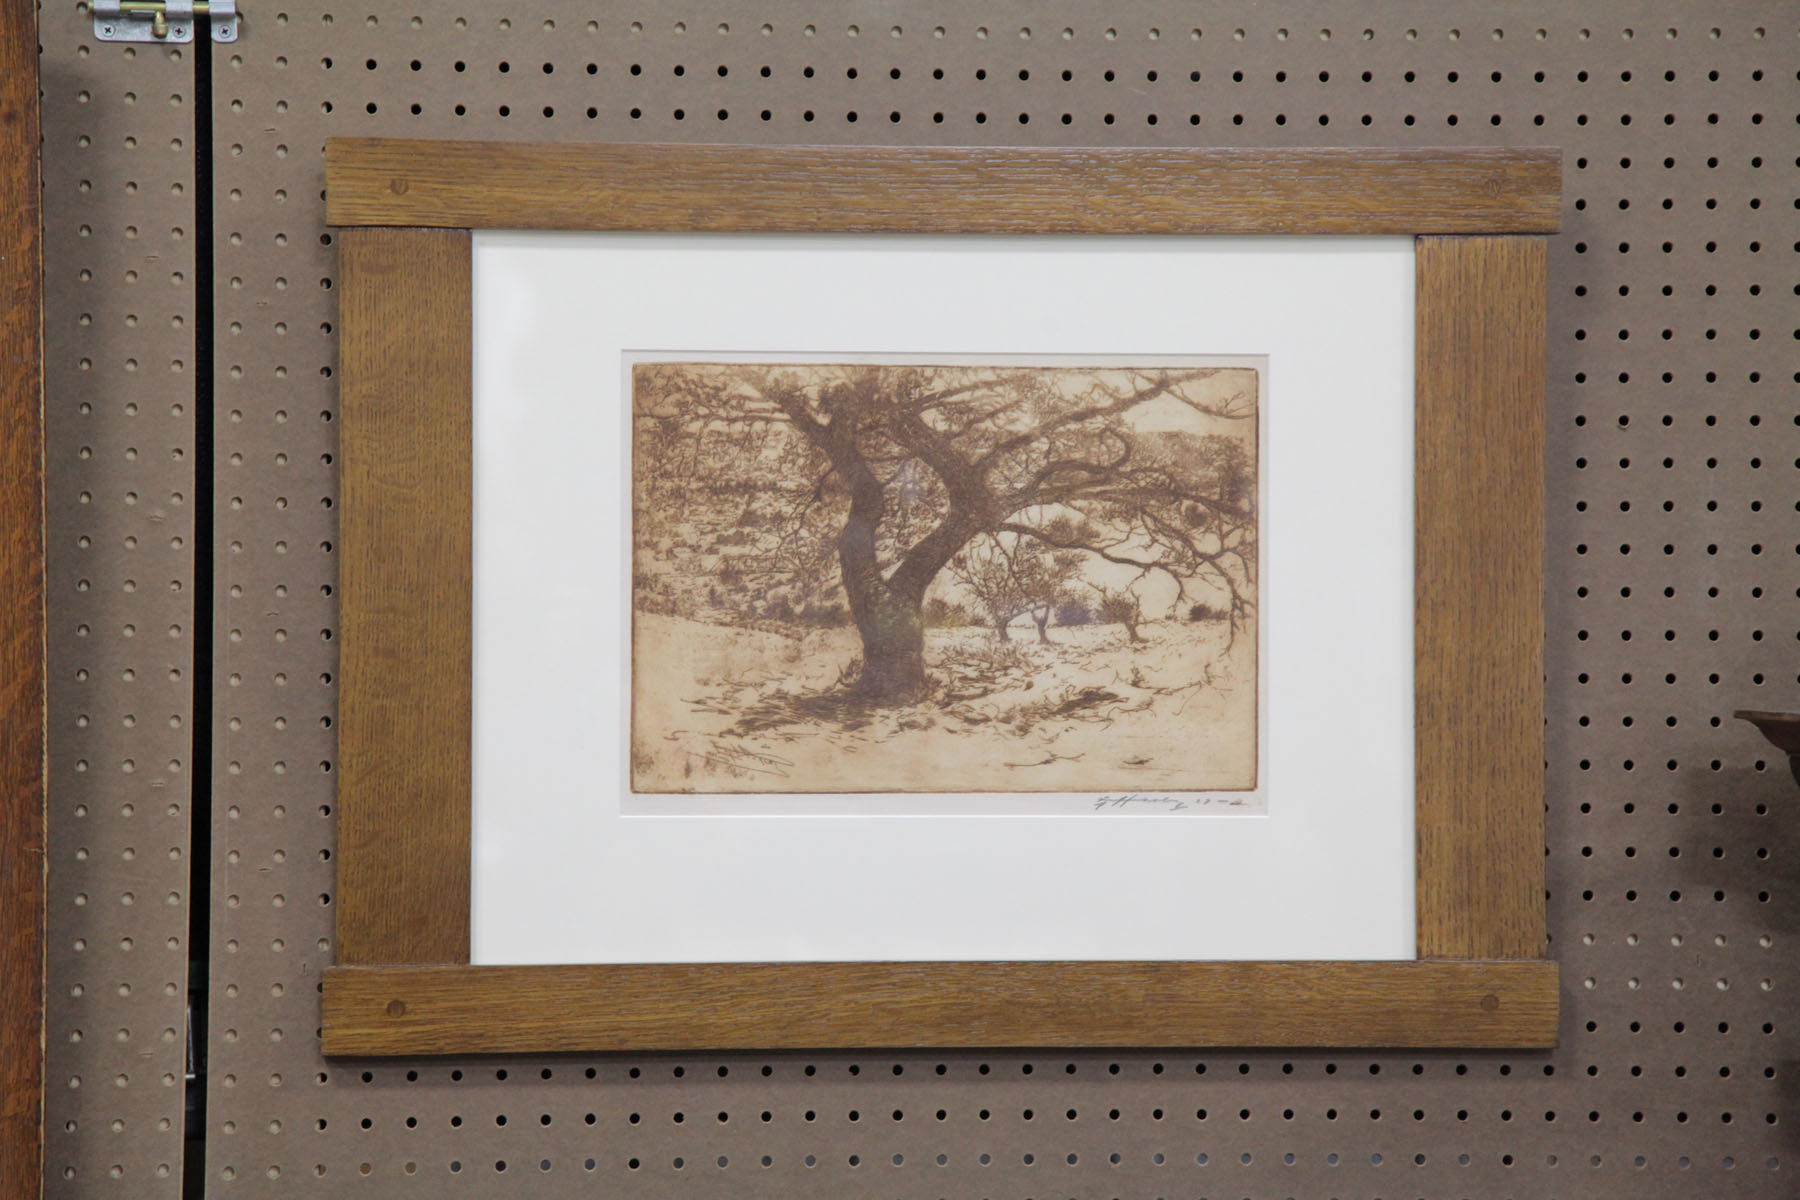 FRAMED ETCHING BY E T HURLEY OHIO 10c2c0